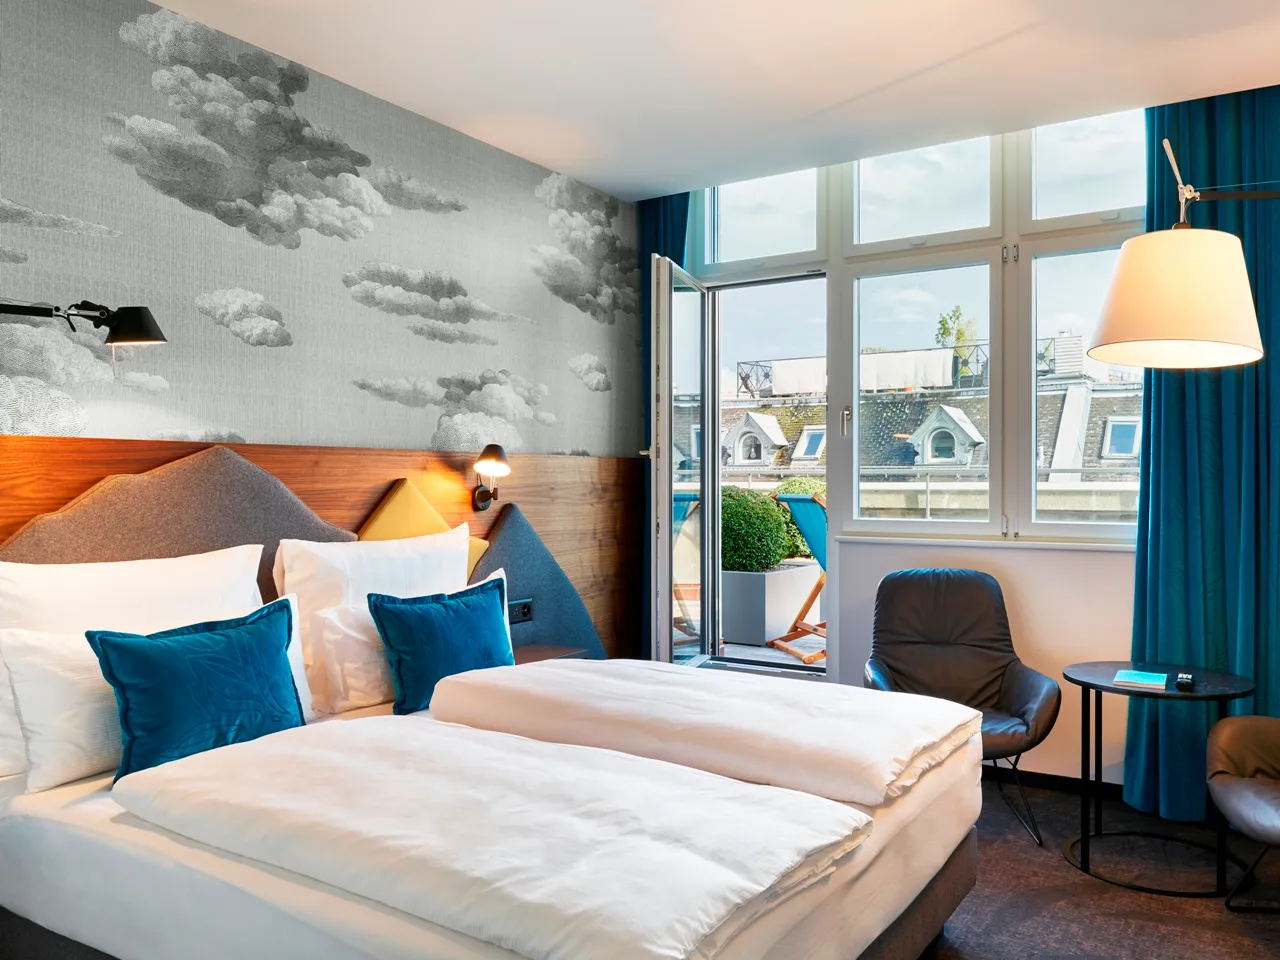 Motel One room interior with double bed and window view
